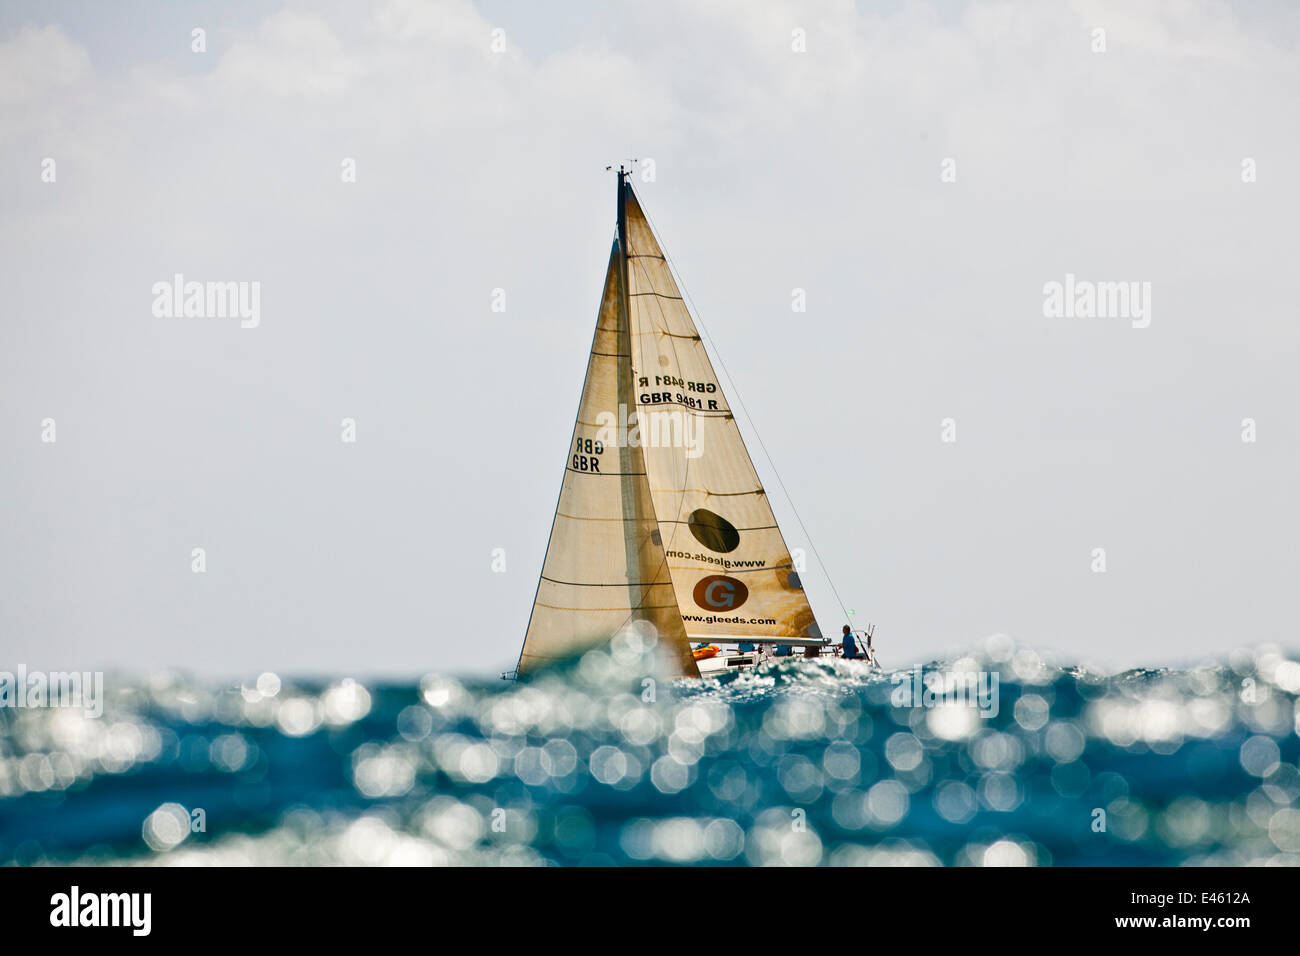 'Lancelot' obscured by glistening wave during the Grenada Sailing Festival, Caribbean, January 2010. Stock Photo